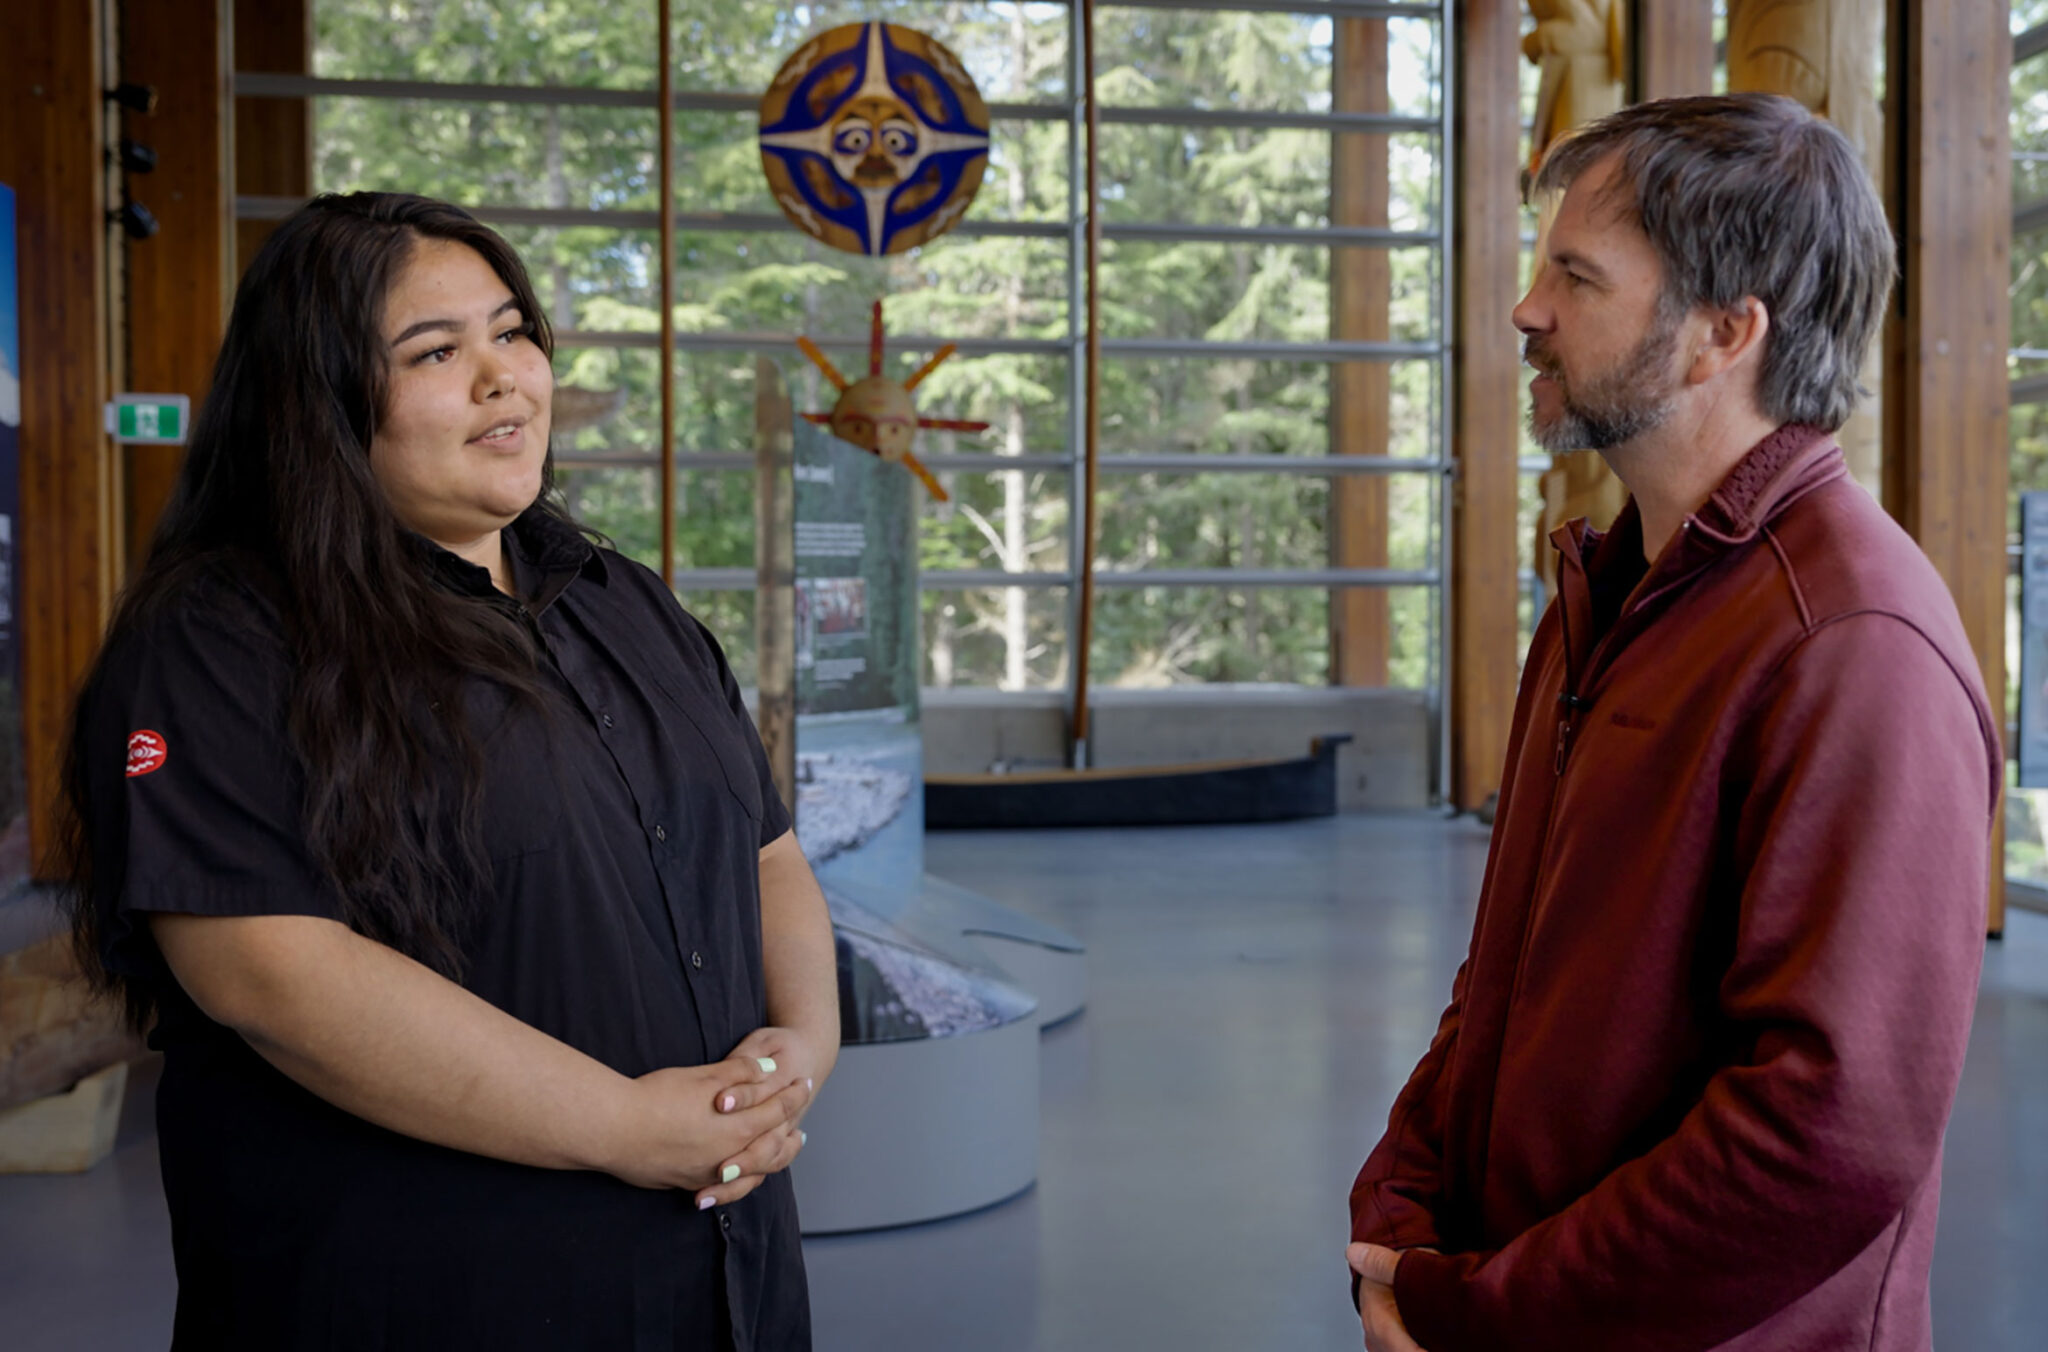 Georgina and Mike talk about cultural revitalization and the Squamish Lil'wat Cultural Centre during the Whistler Changemaker video series.